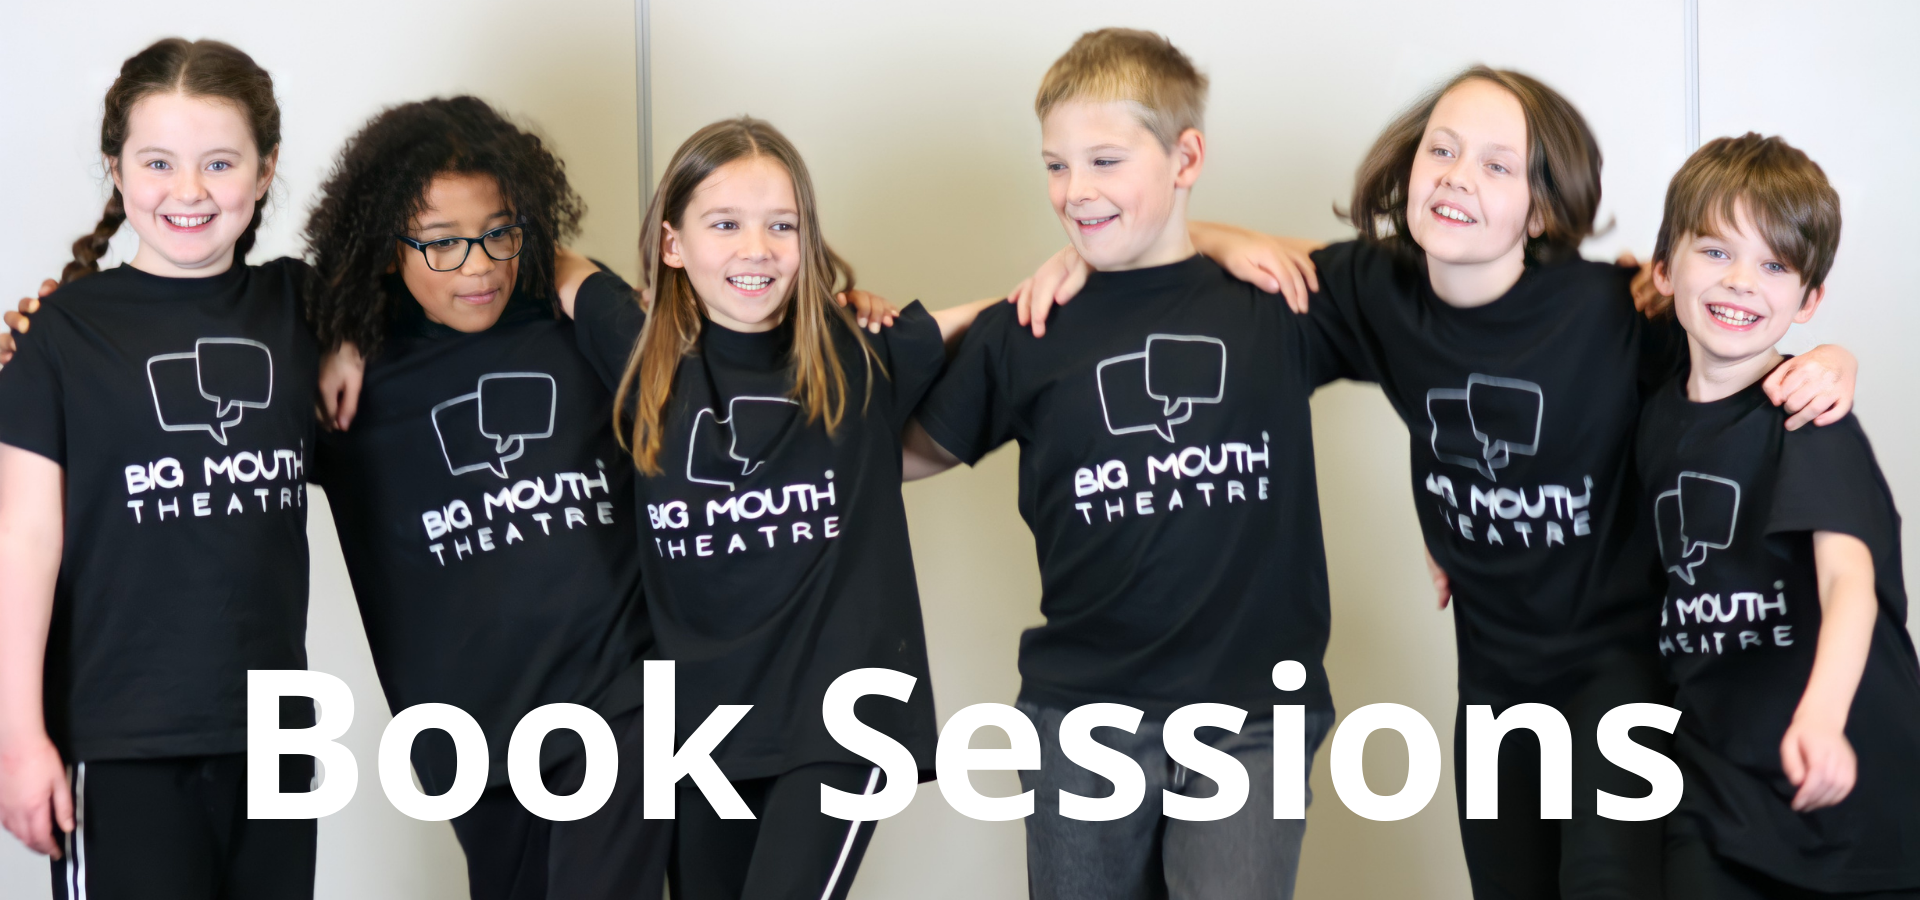 Big Mouth Theatre Book Sessions image